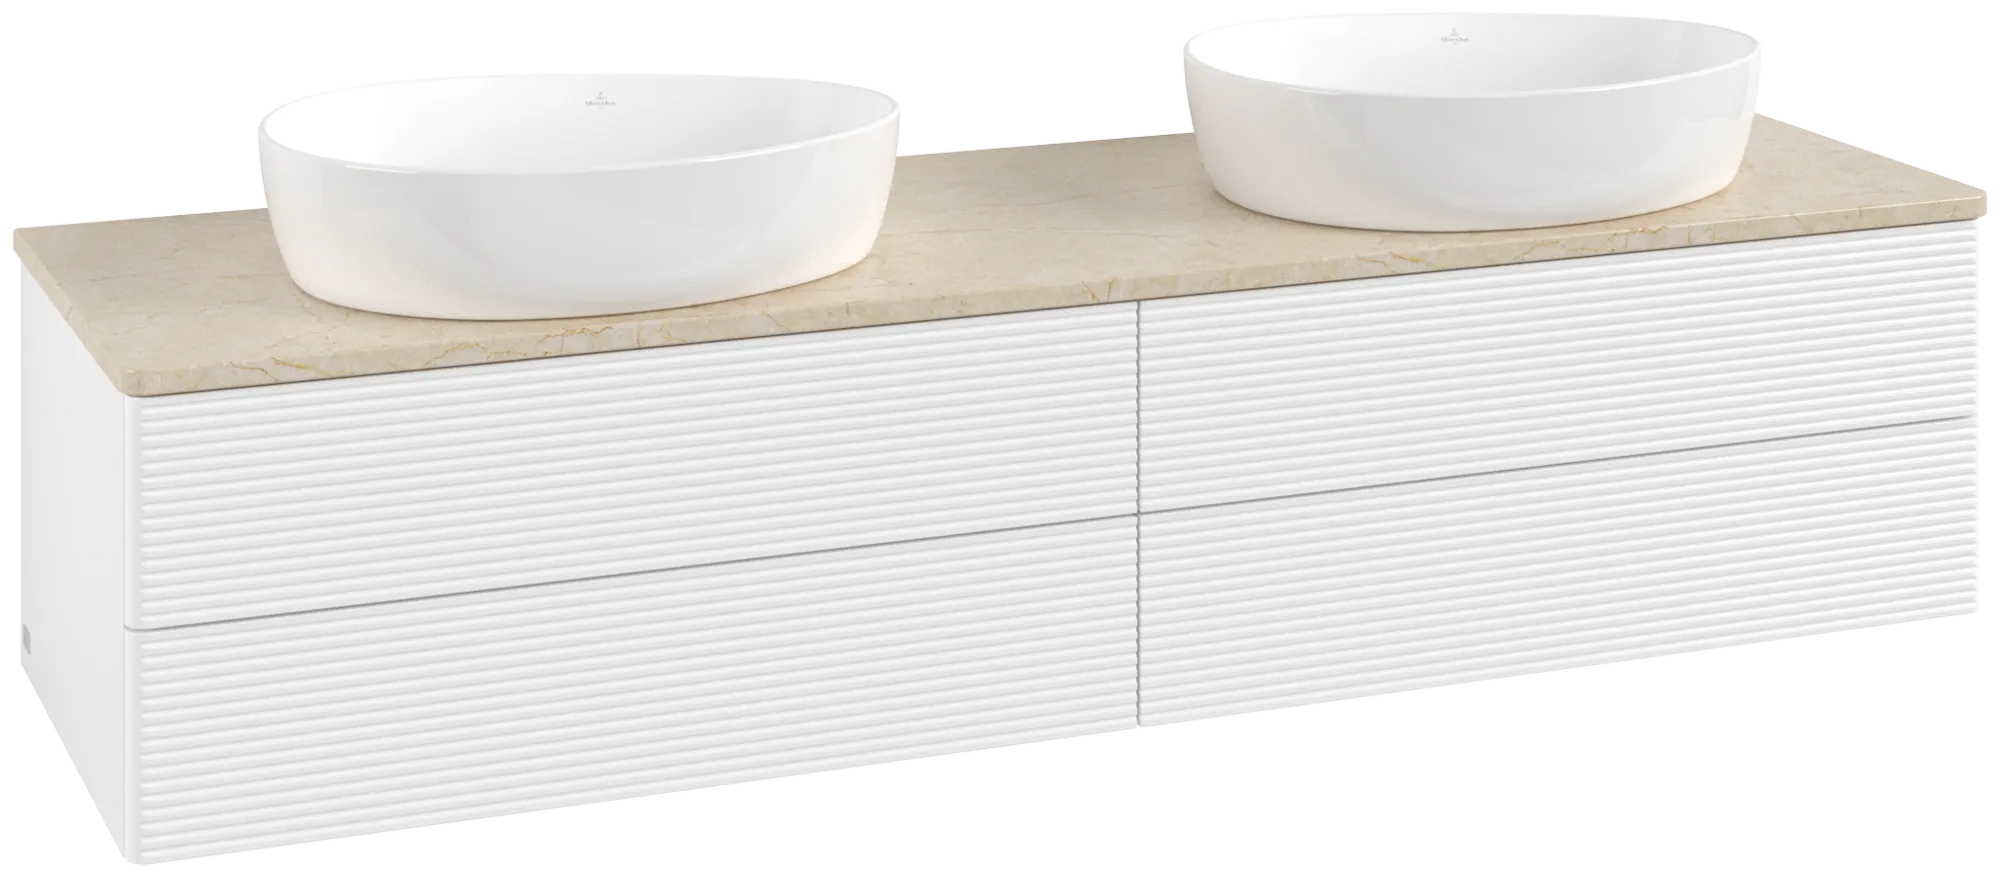 Picture of VILLEROY BOCH Antao Vanity unit, with lighting, 4 pull-out compartments, 1600 x 360 x 500 mm, Front with grain texture, White Matt Lacquer / Botticino #L28113MT